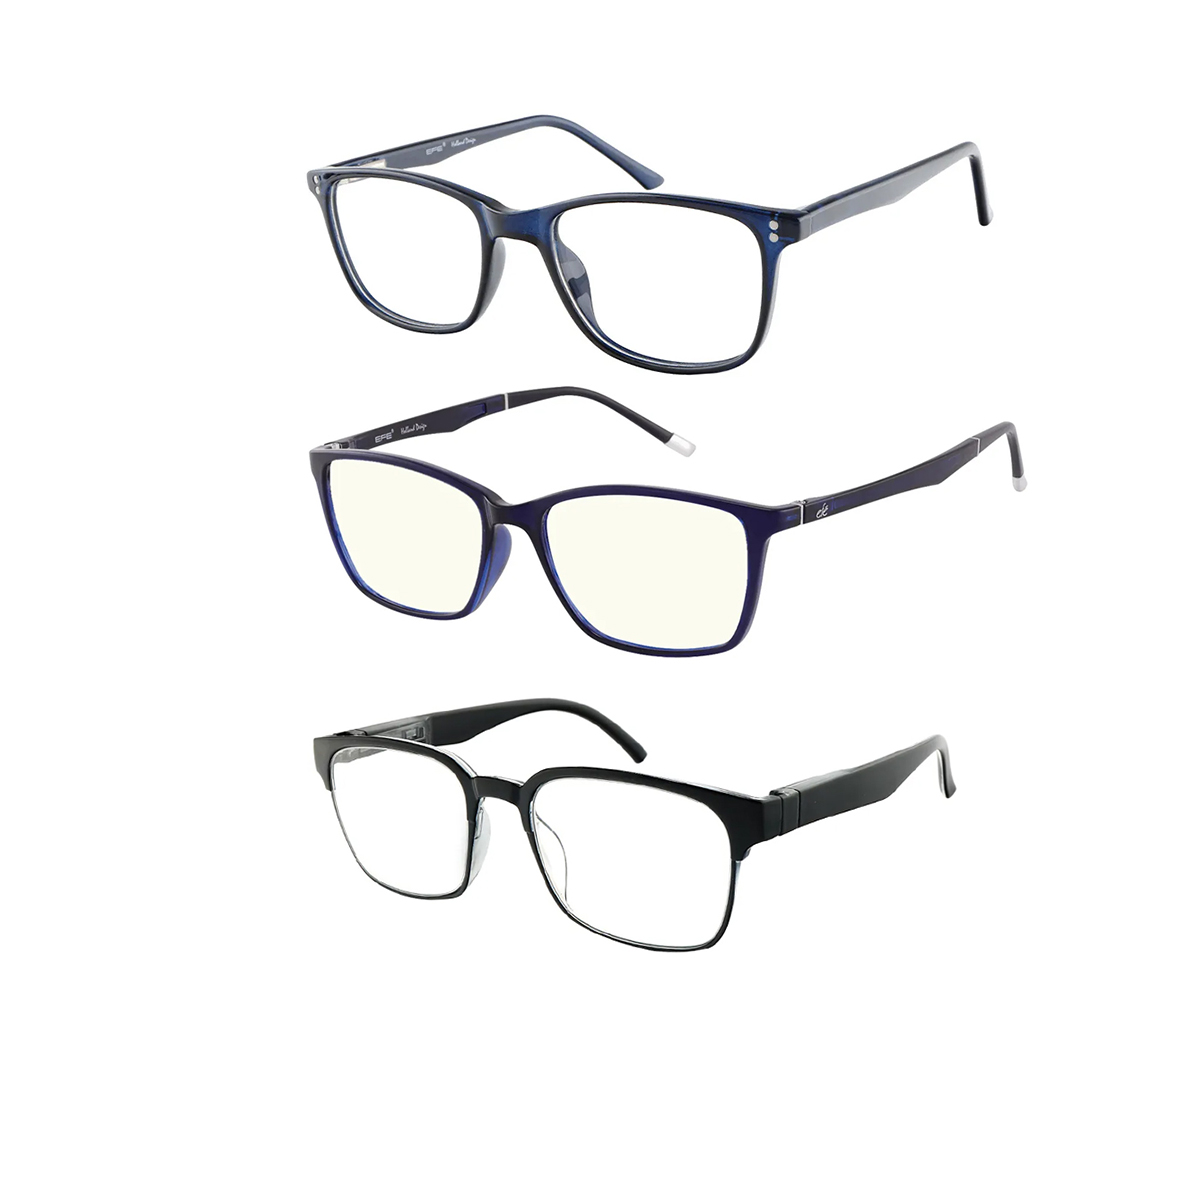 Reading Glasses Collection Ross $24.99/Set